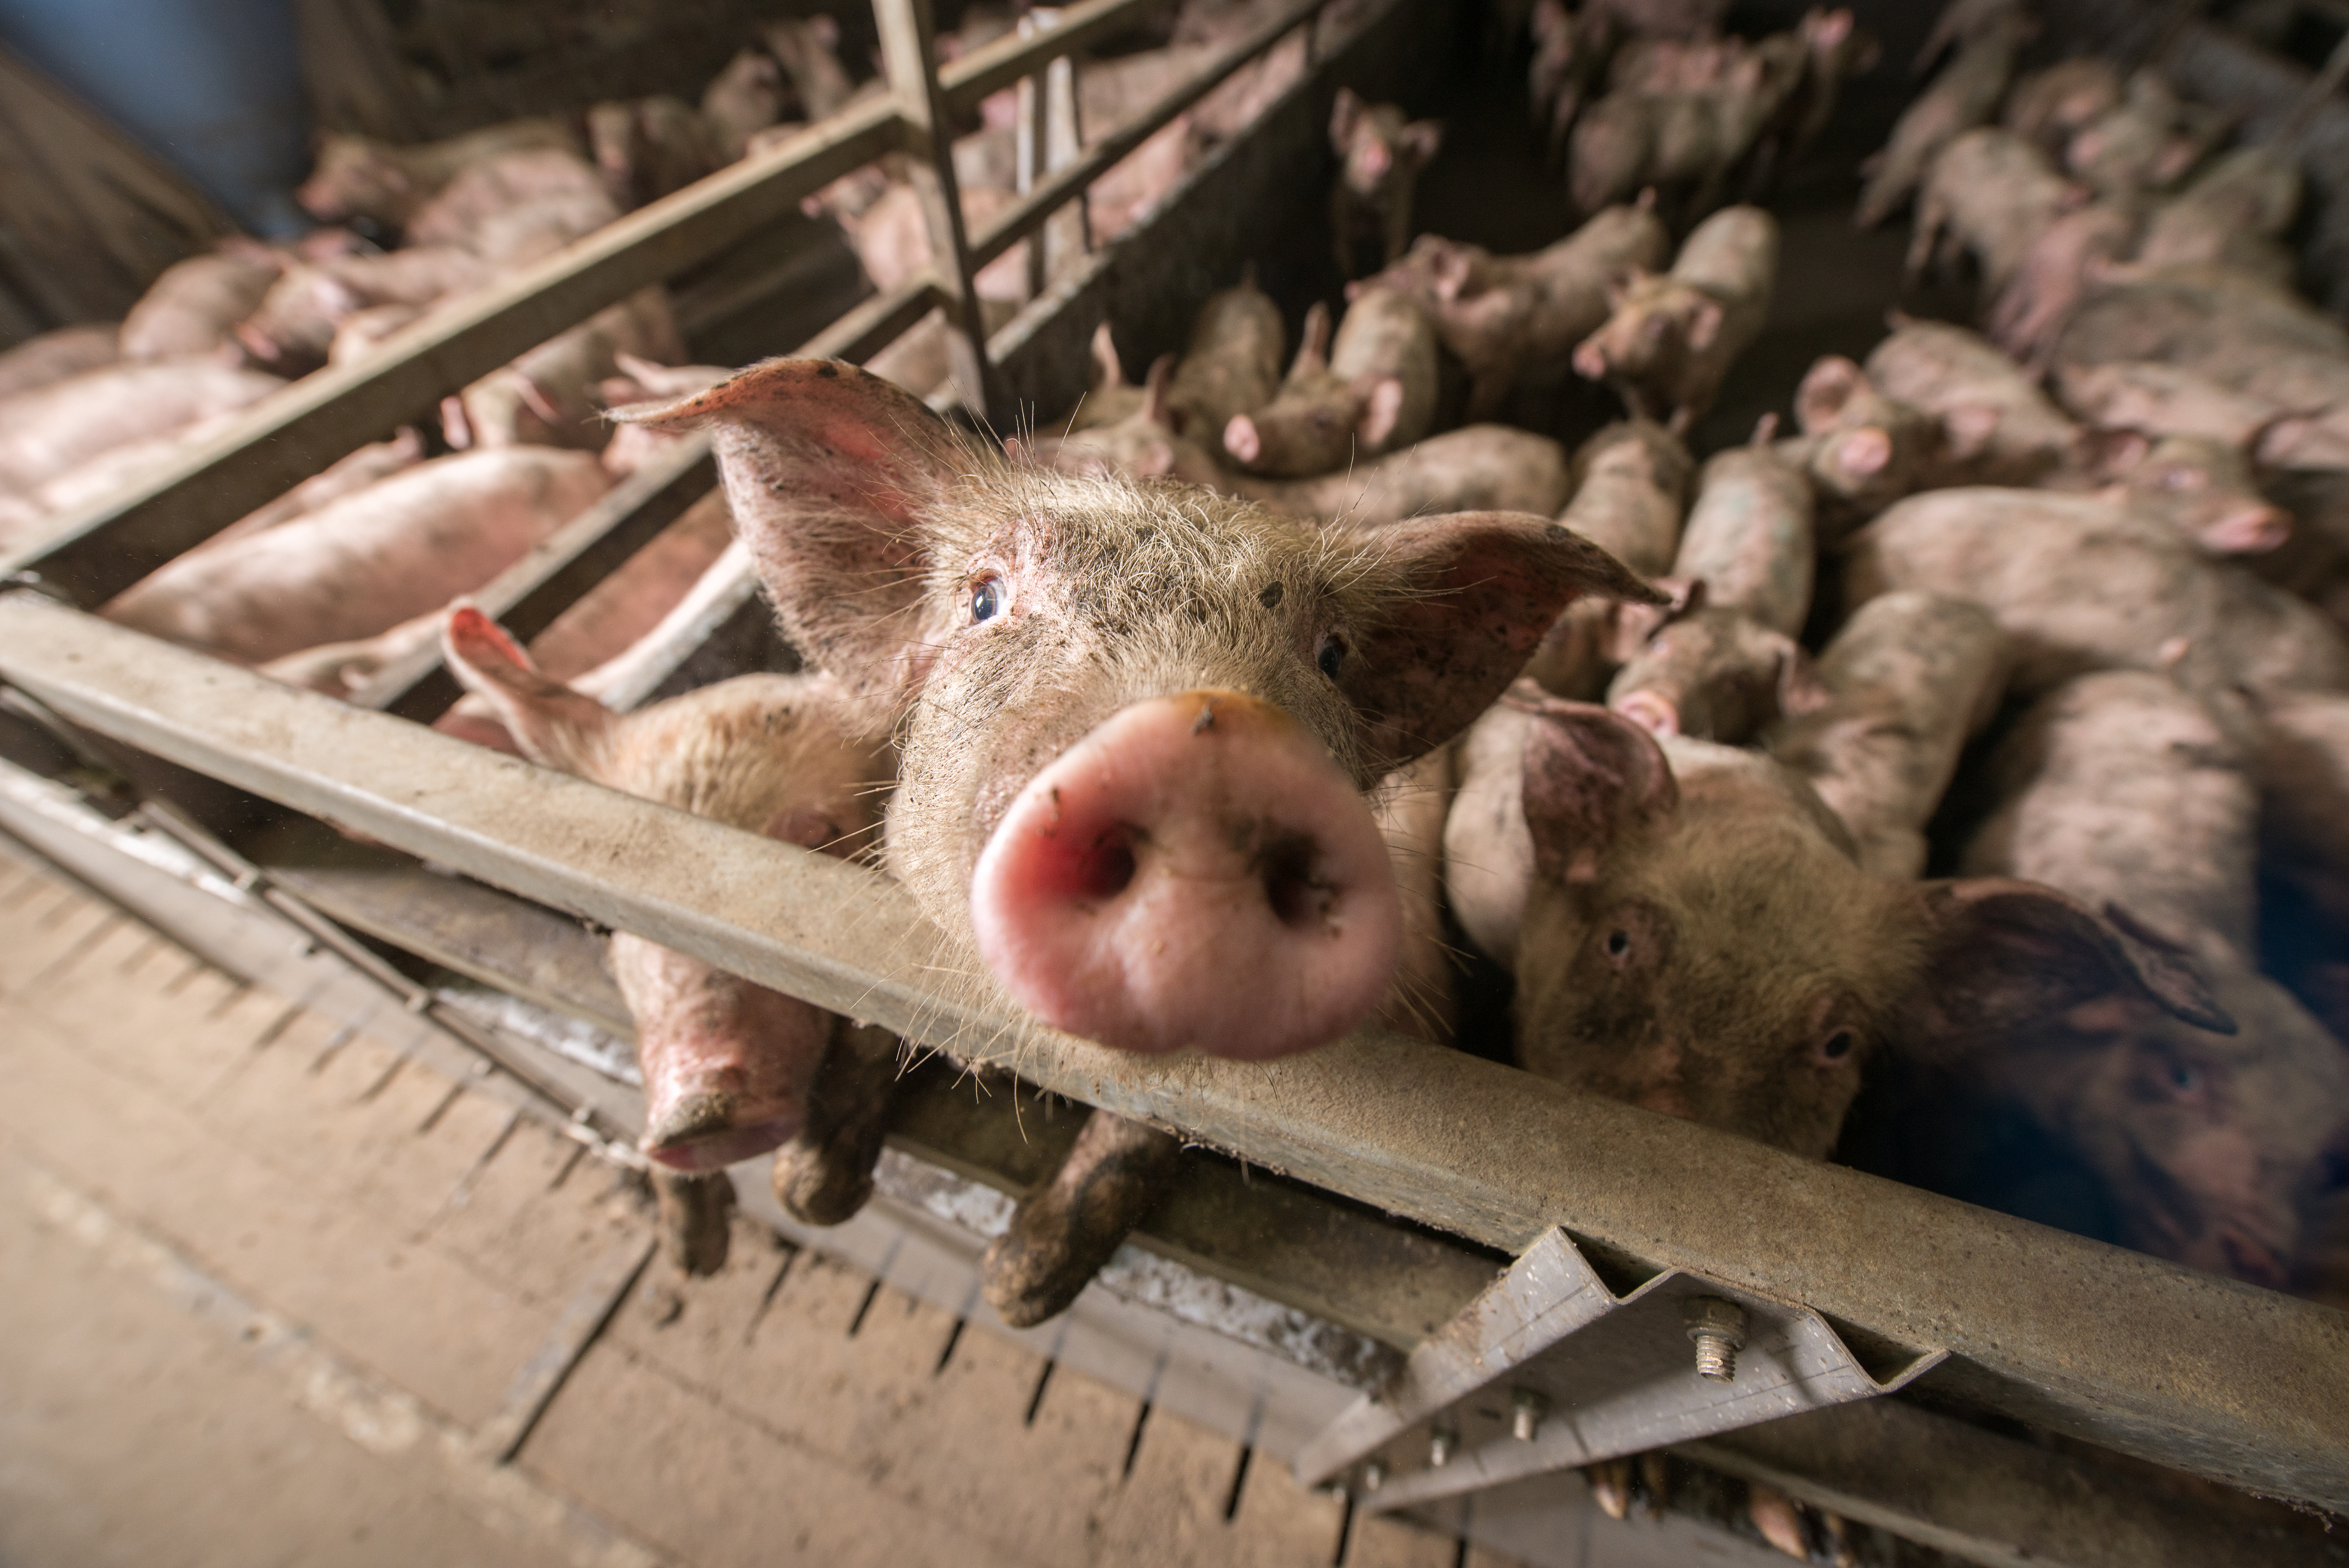 Pigs suffocate on factory farm